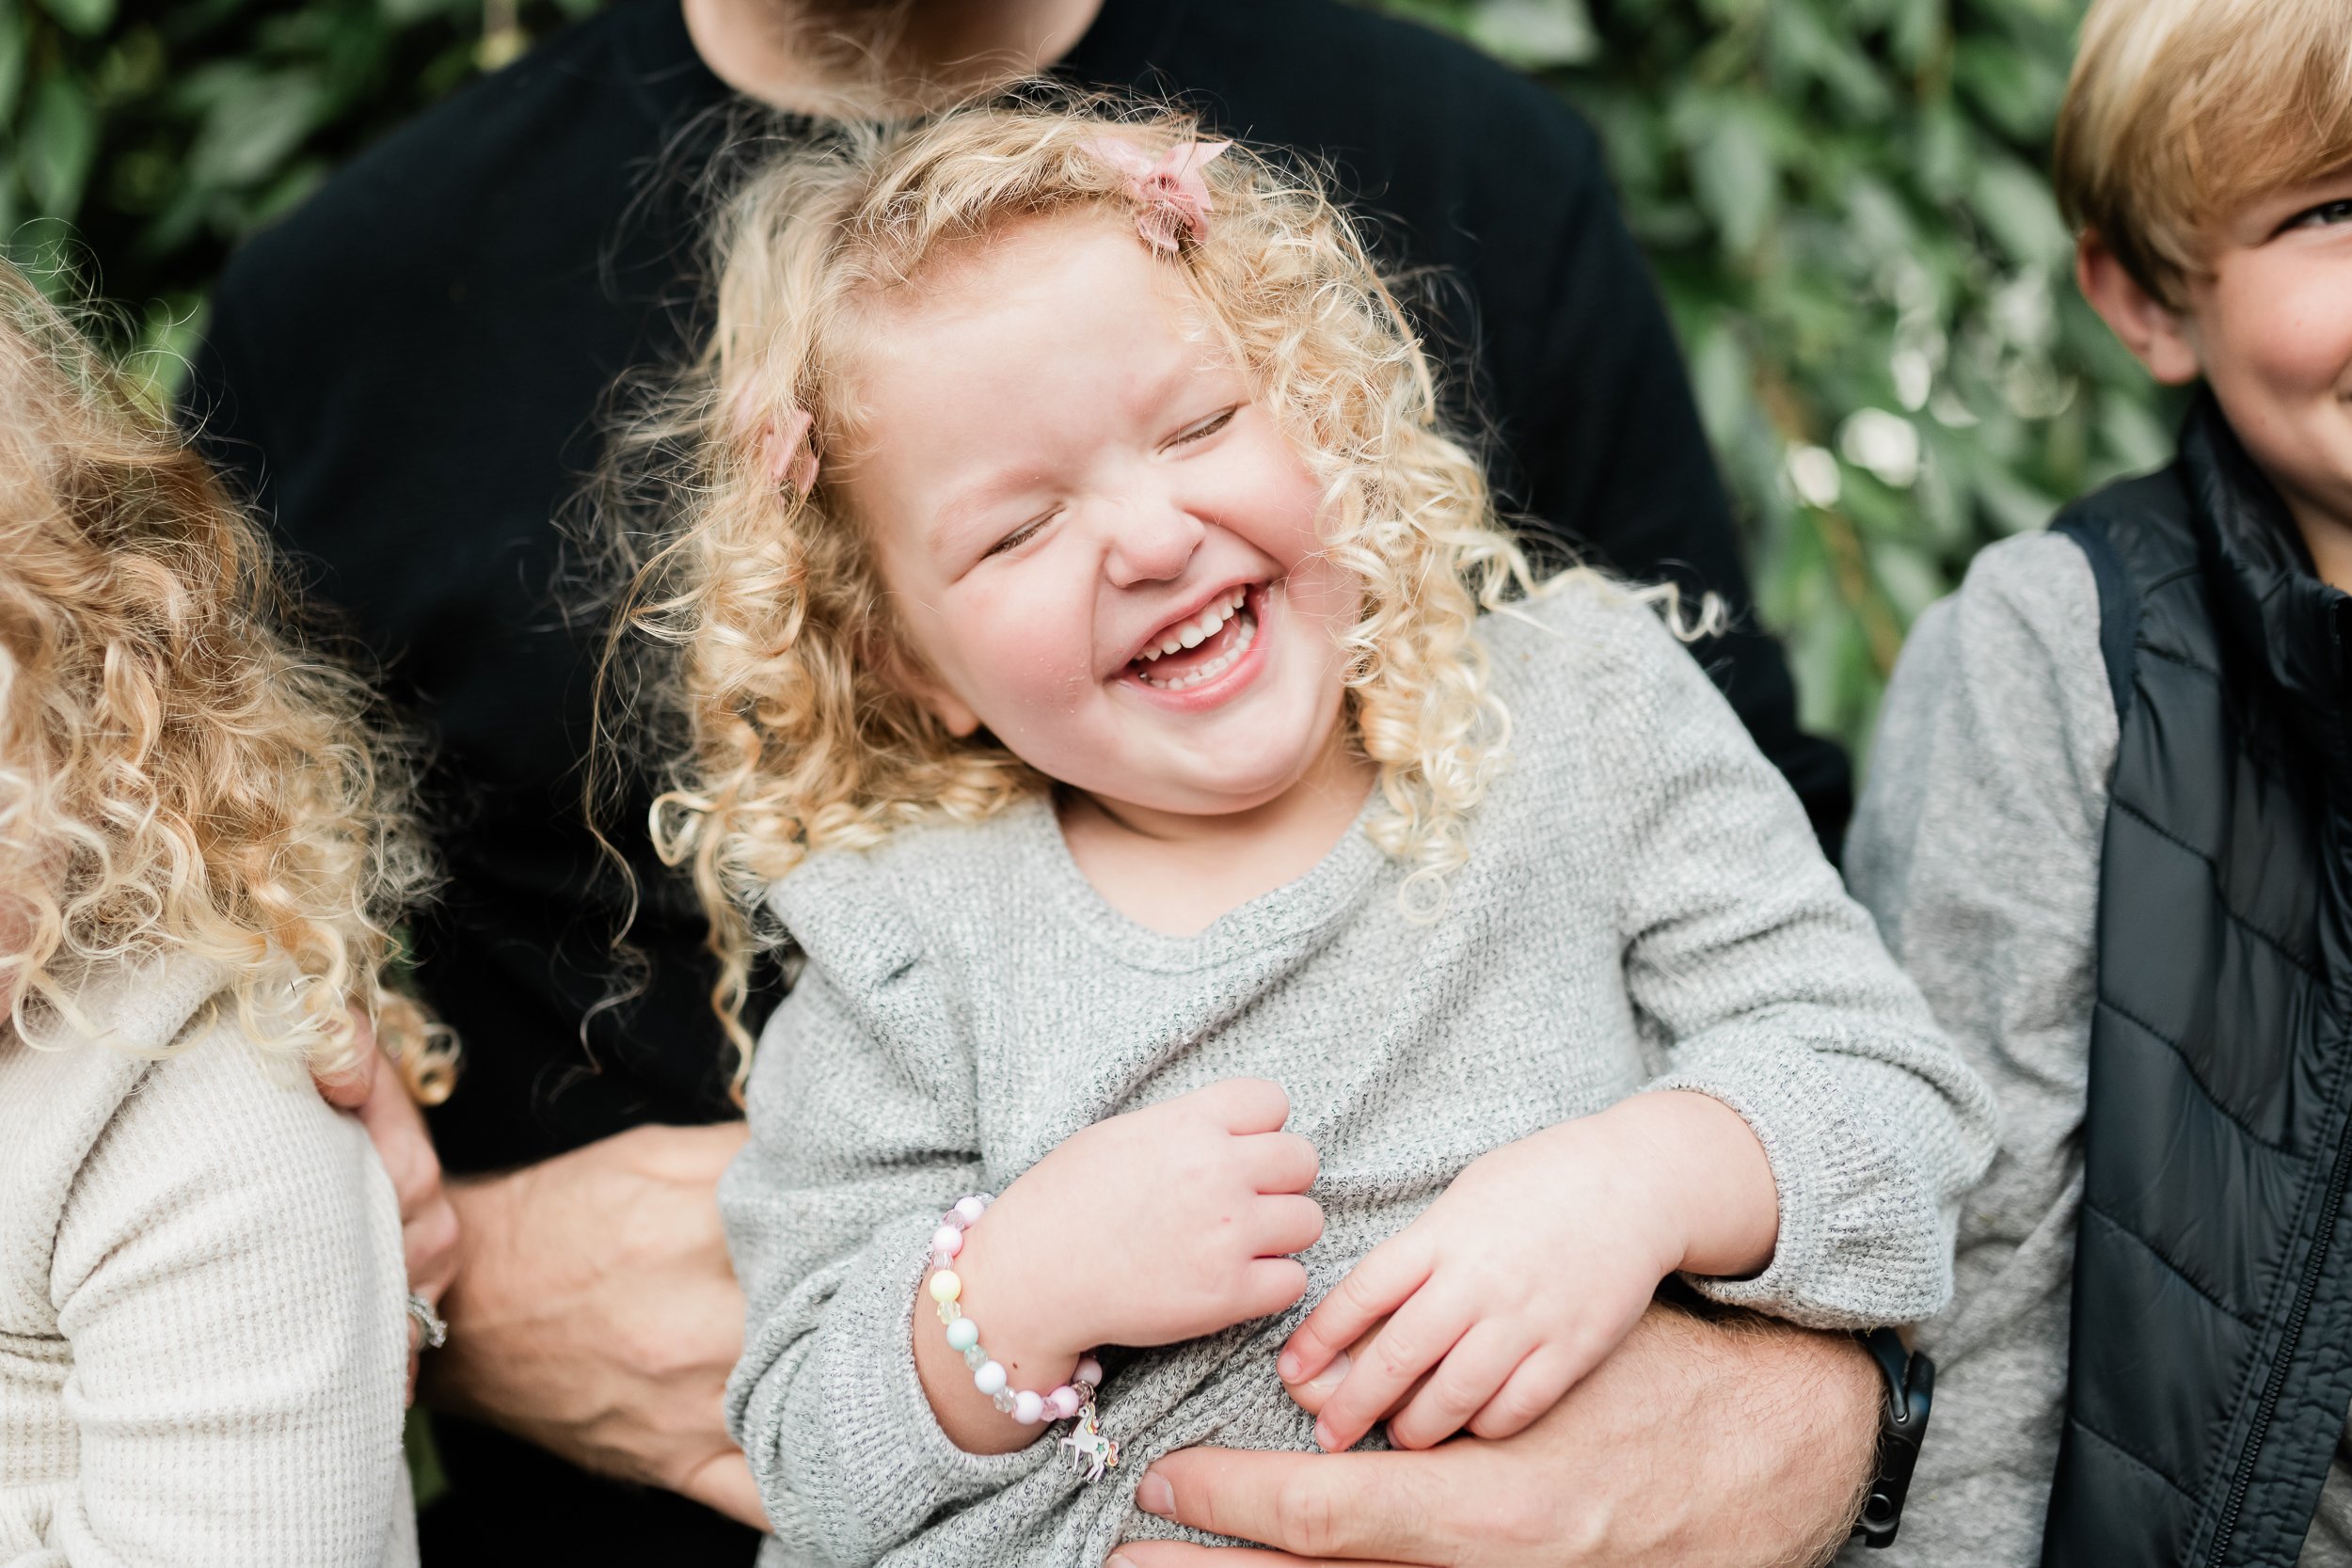  Little girl giggles when her daddy tickles her during a photo session. 